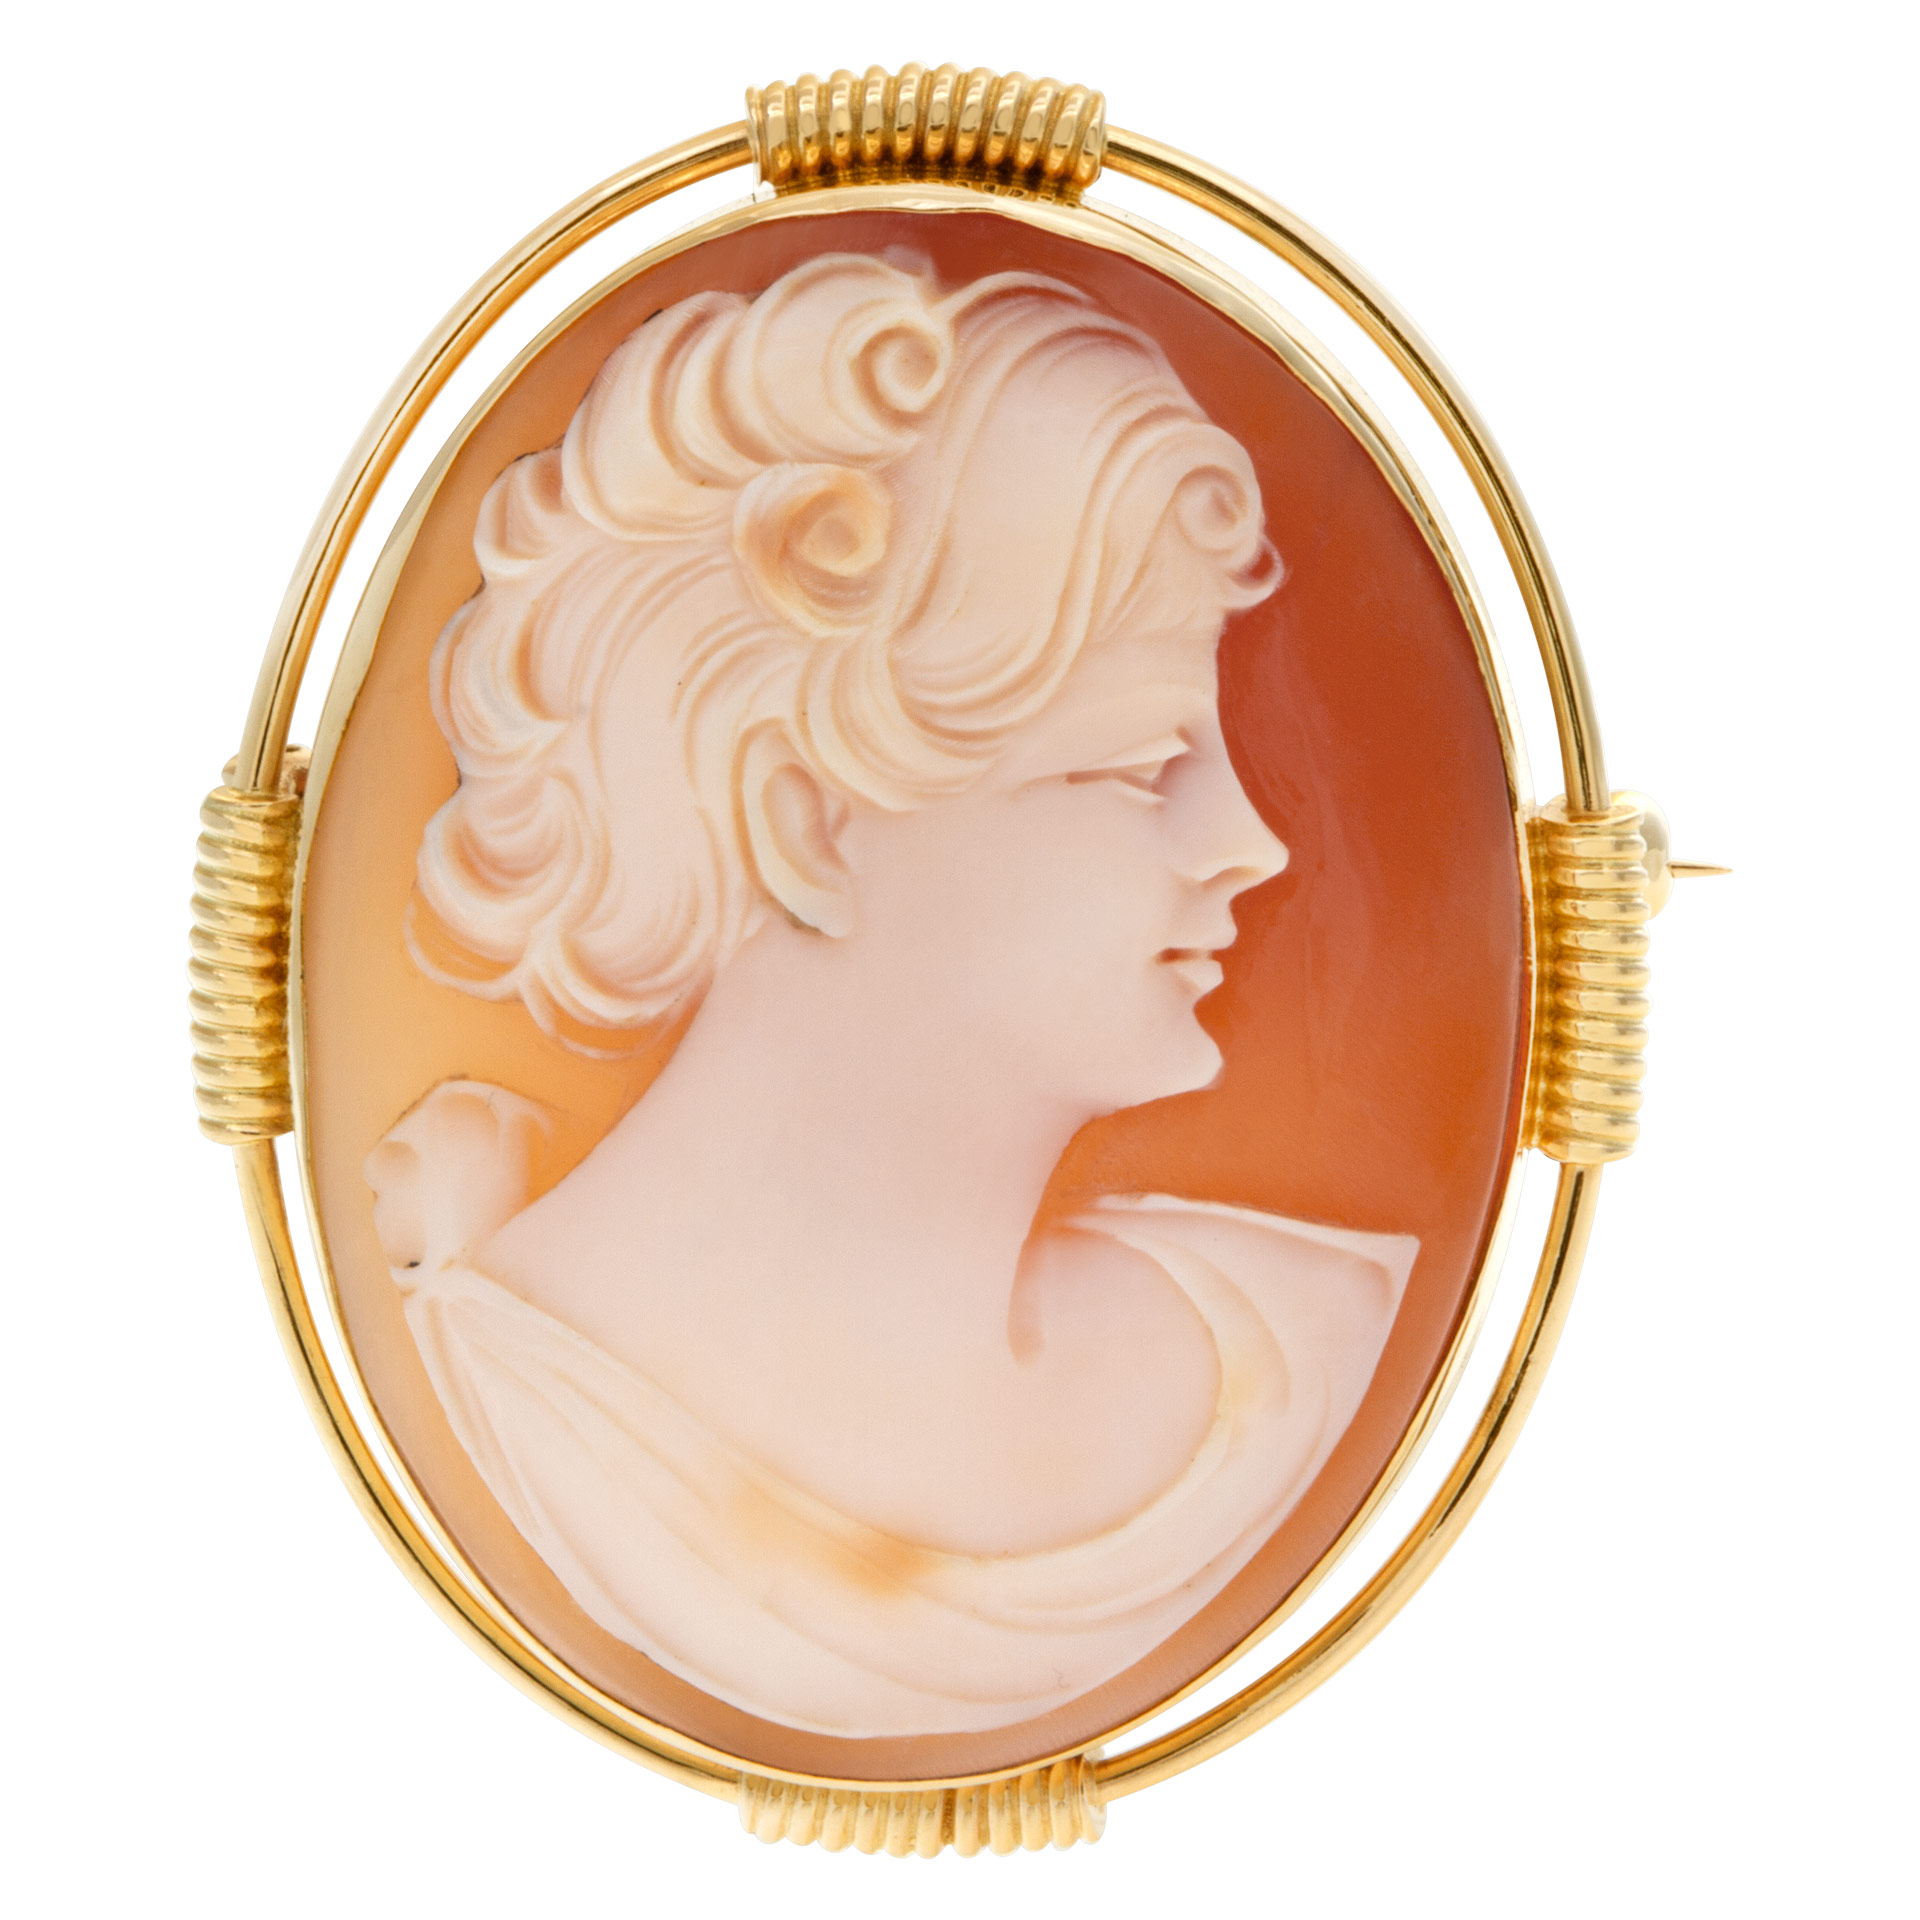 Shell Cameo pin/pendant portrait of a short hair lady set in 14k yellow gold.